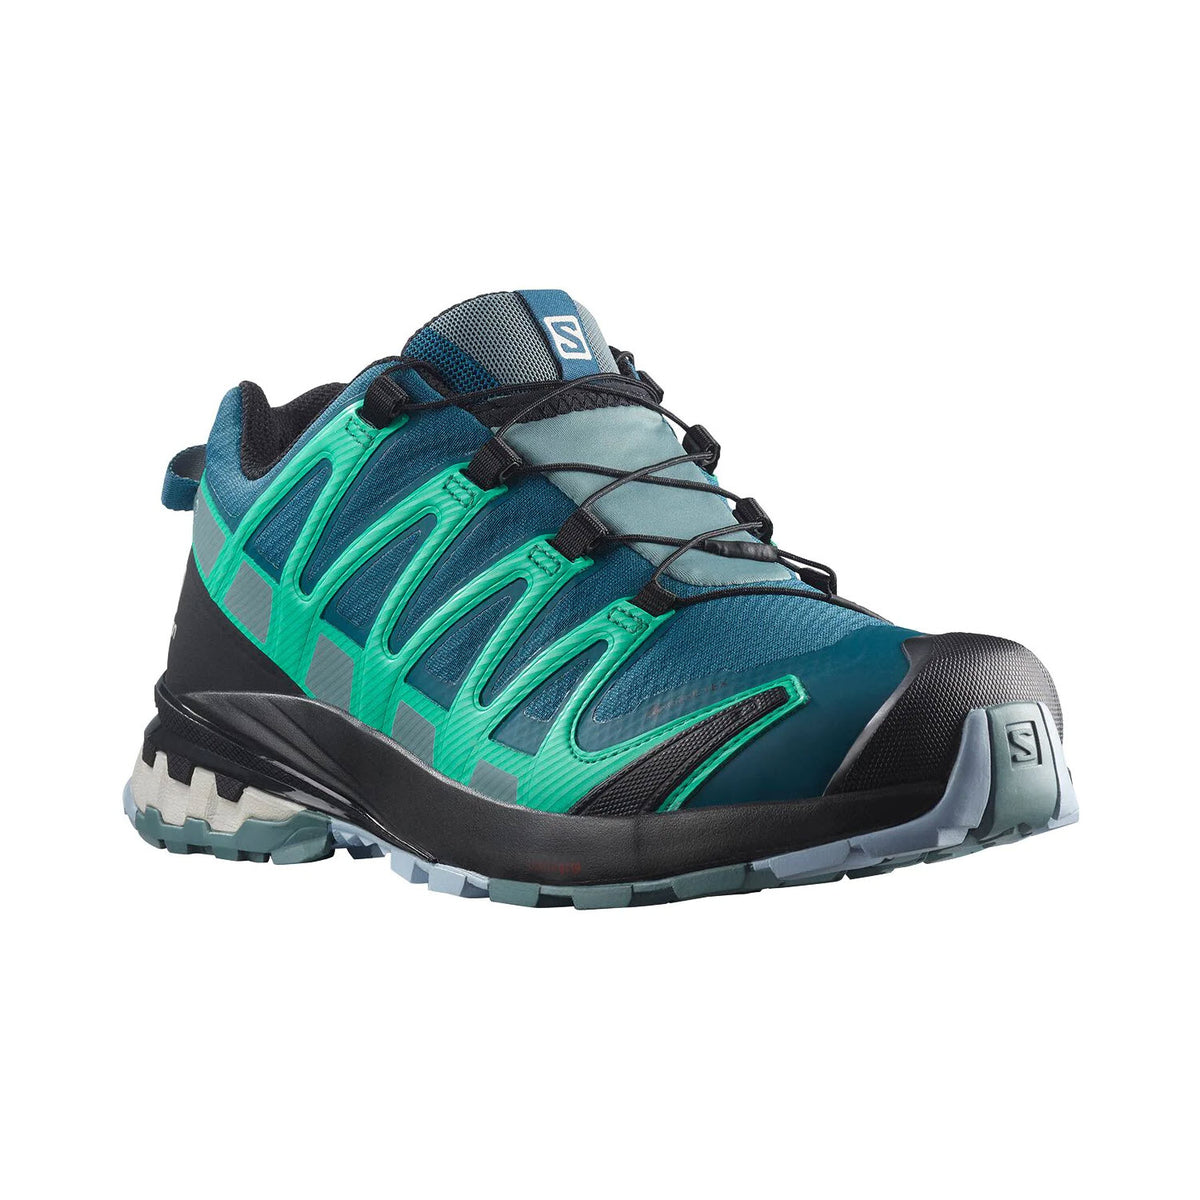 A blue and green Salomon XA Pro 3D V8 GTX LEGION BLUE Shoe with reinforced toe cap and rugged Contragrip outsole.